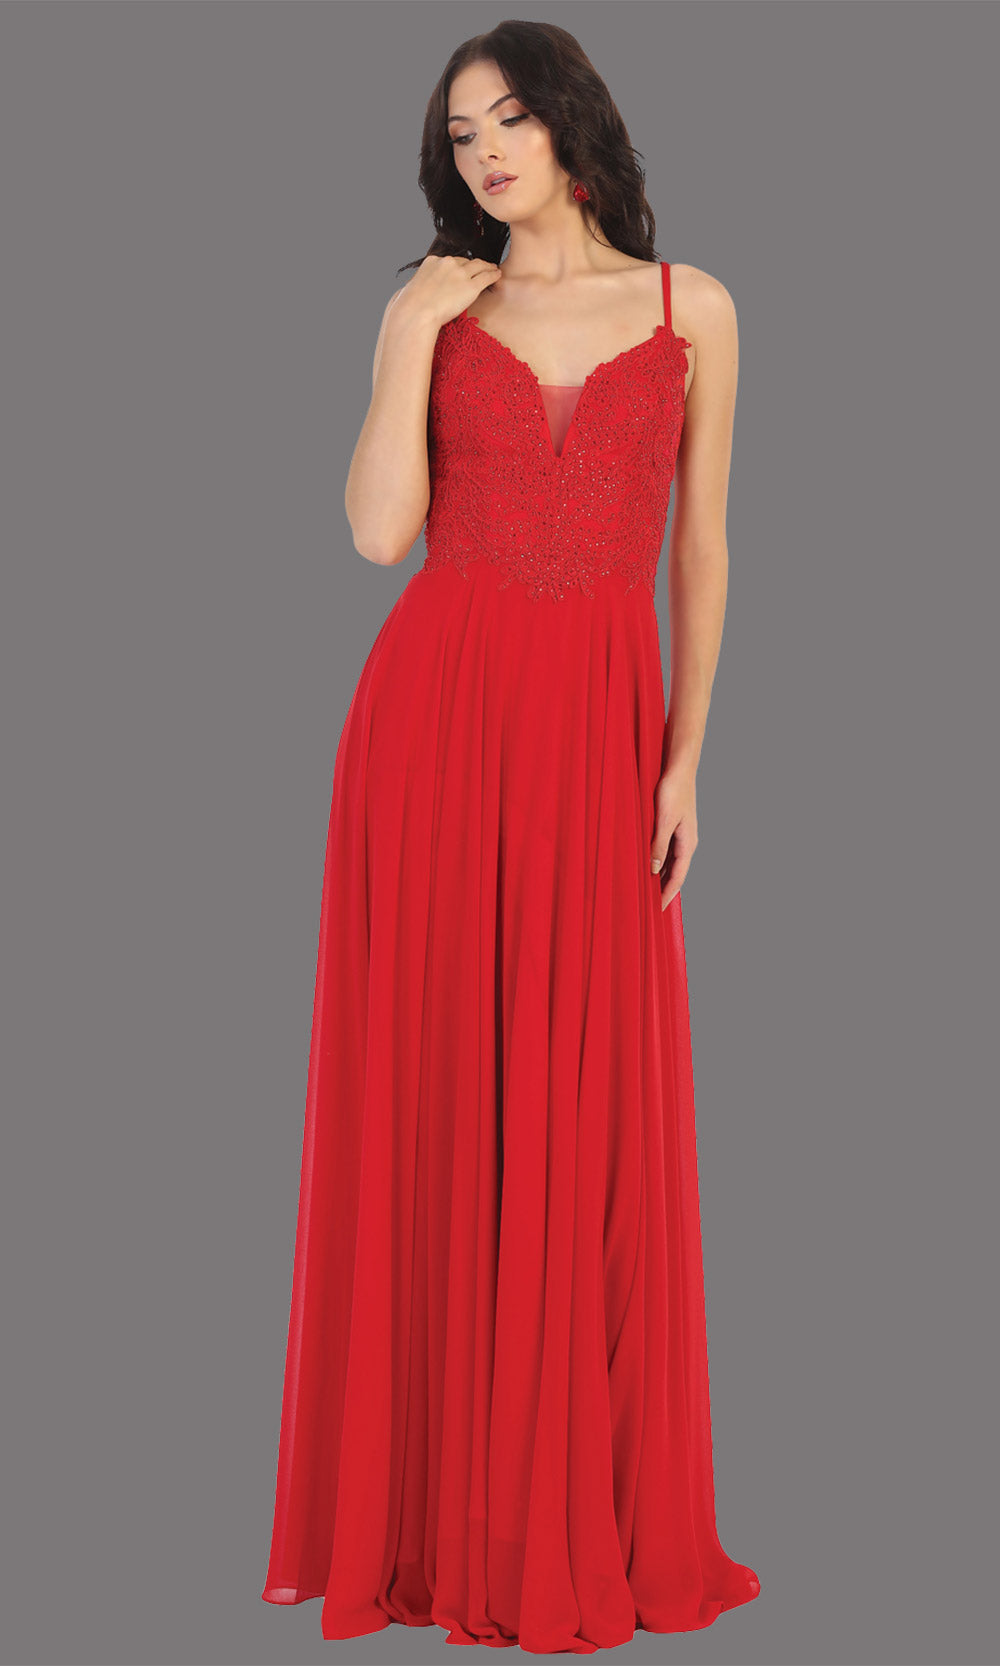 Mayqueen MQ1750 long red flowy sleek & sexy dress w/straps. This red dress is perfect for bridesmaid dresses, simple wedding guest dress, prom dress, gala, black tie wedding. Plus sizes are available, evening party dress.jpg